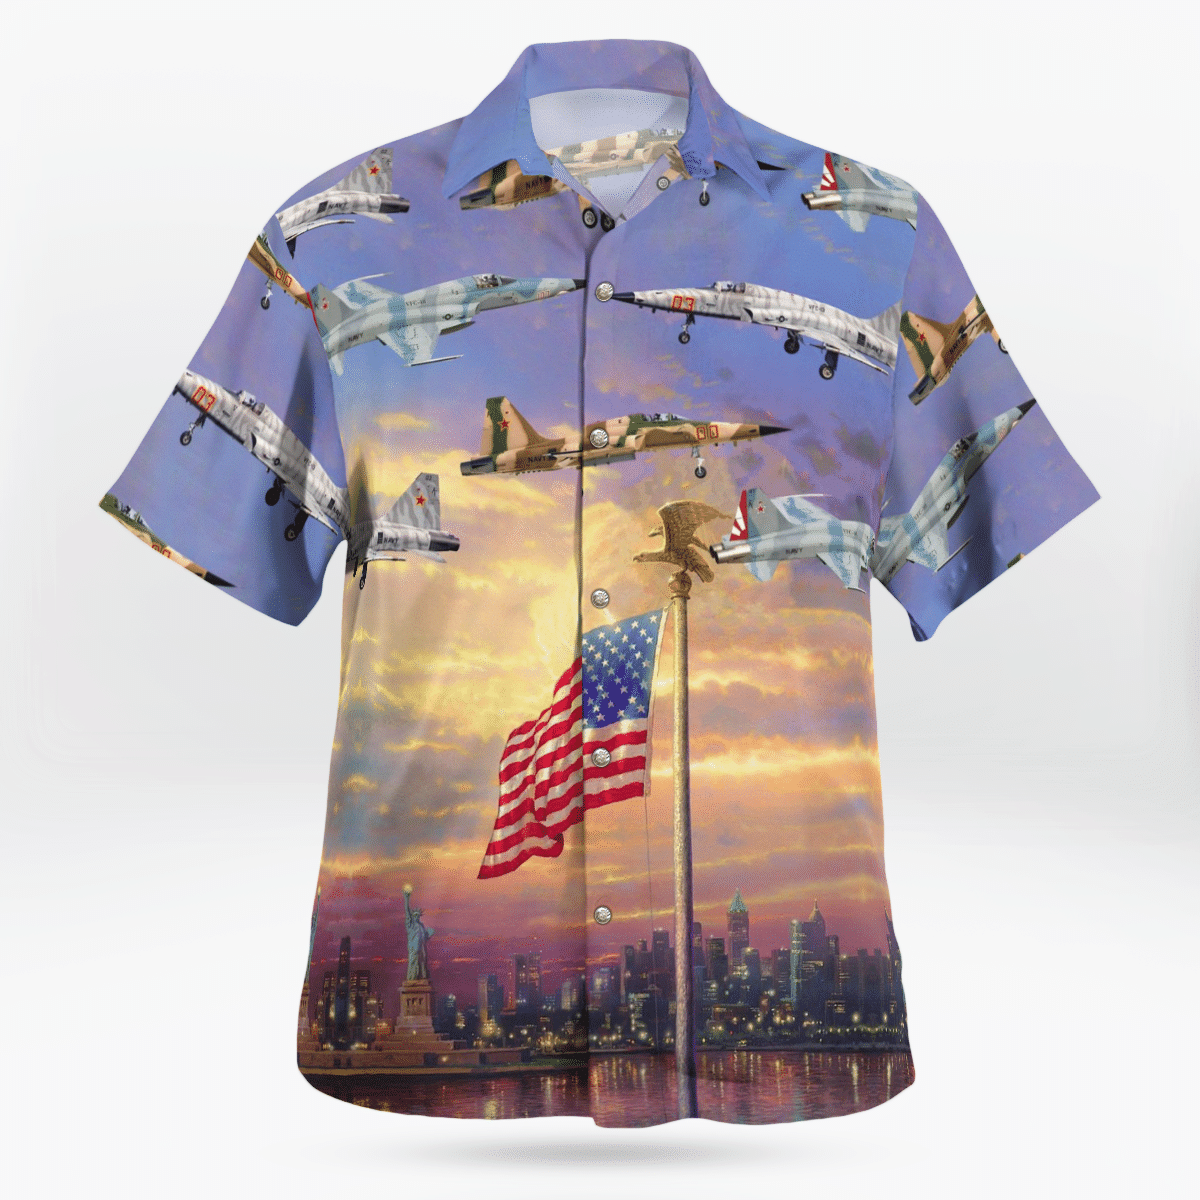 HOT US Navy Northrop F-5N Tiger Independence Day The Statue of Liberty Hawaii Shirt 2